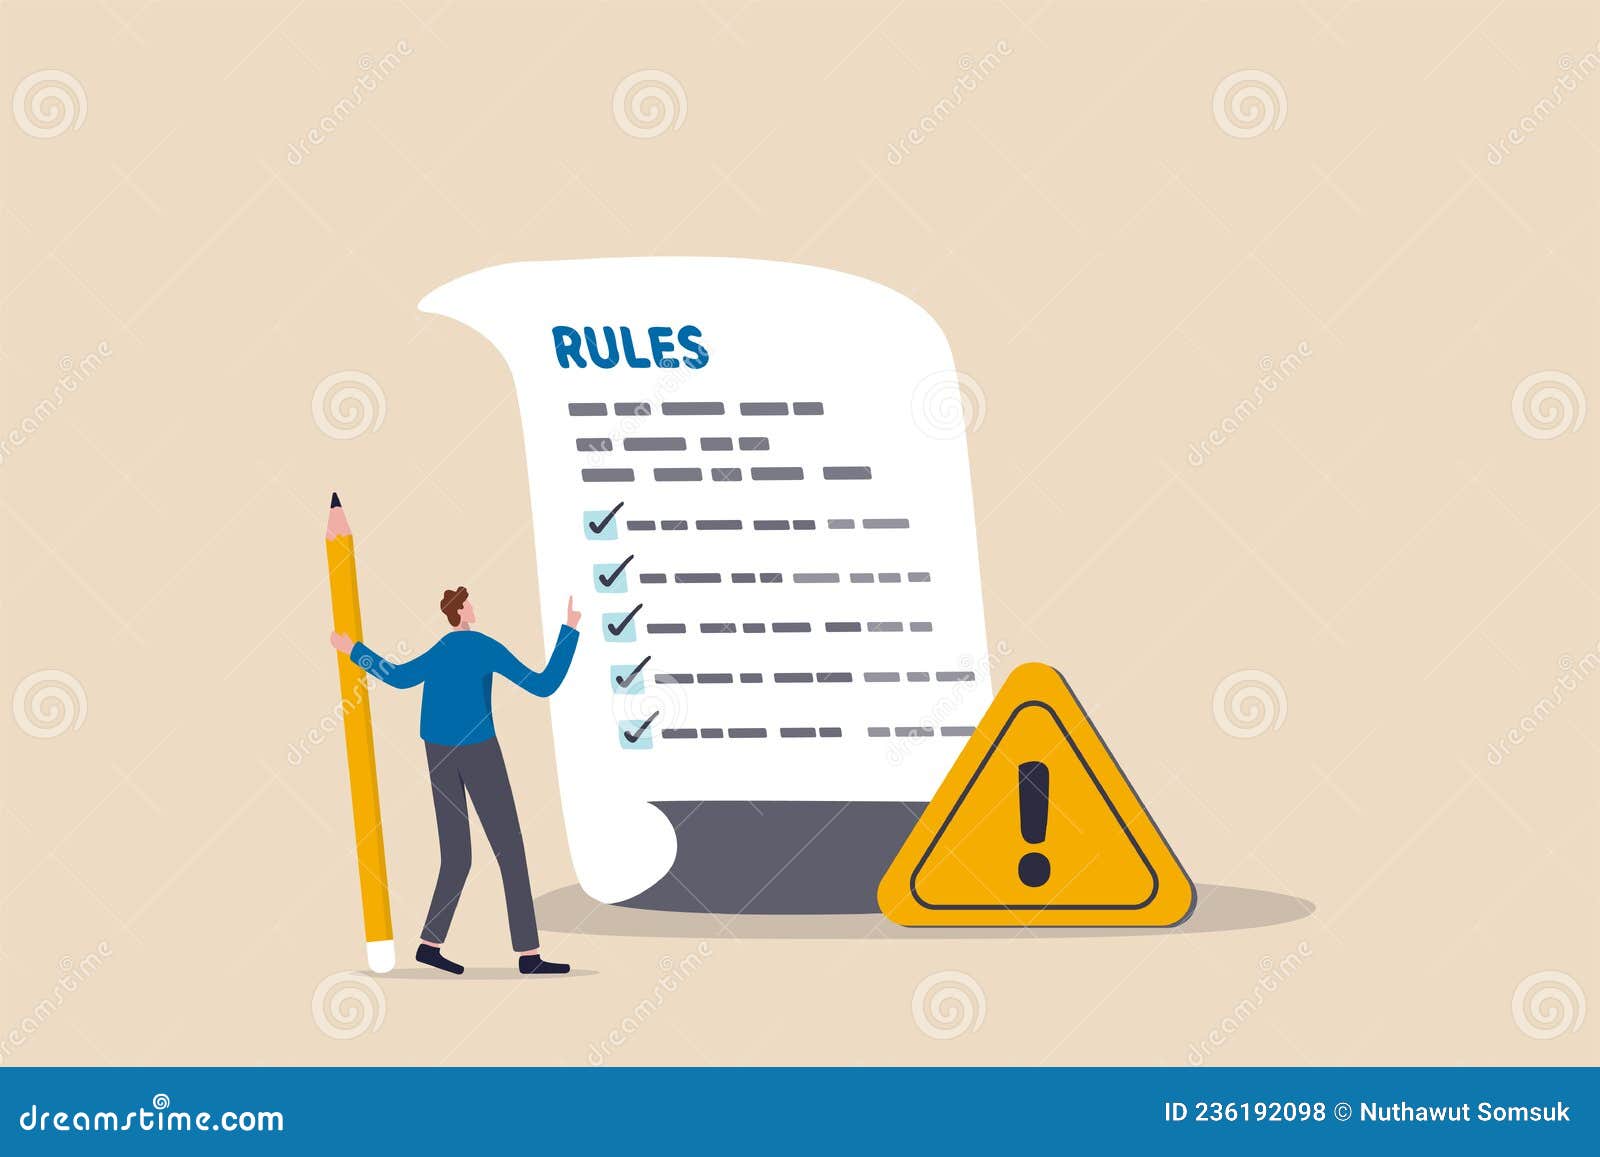 rules-and-regulations-policy-and-guideline-for-employee-to-follow